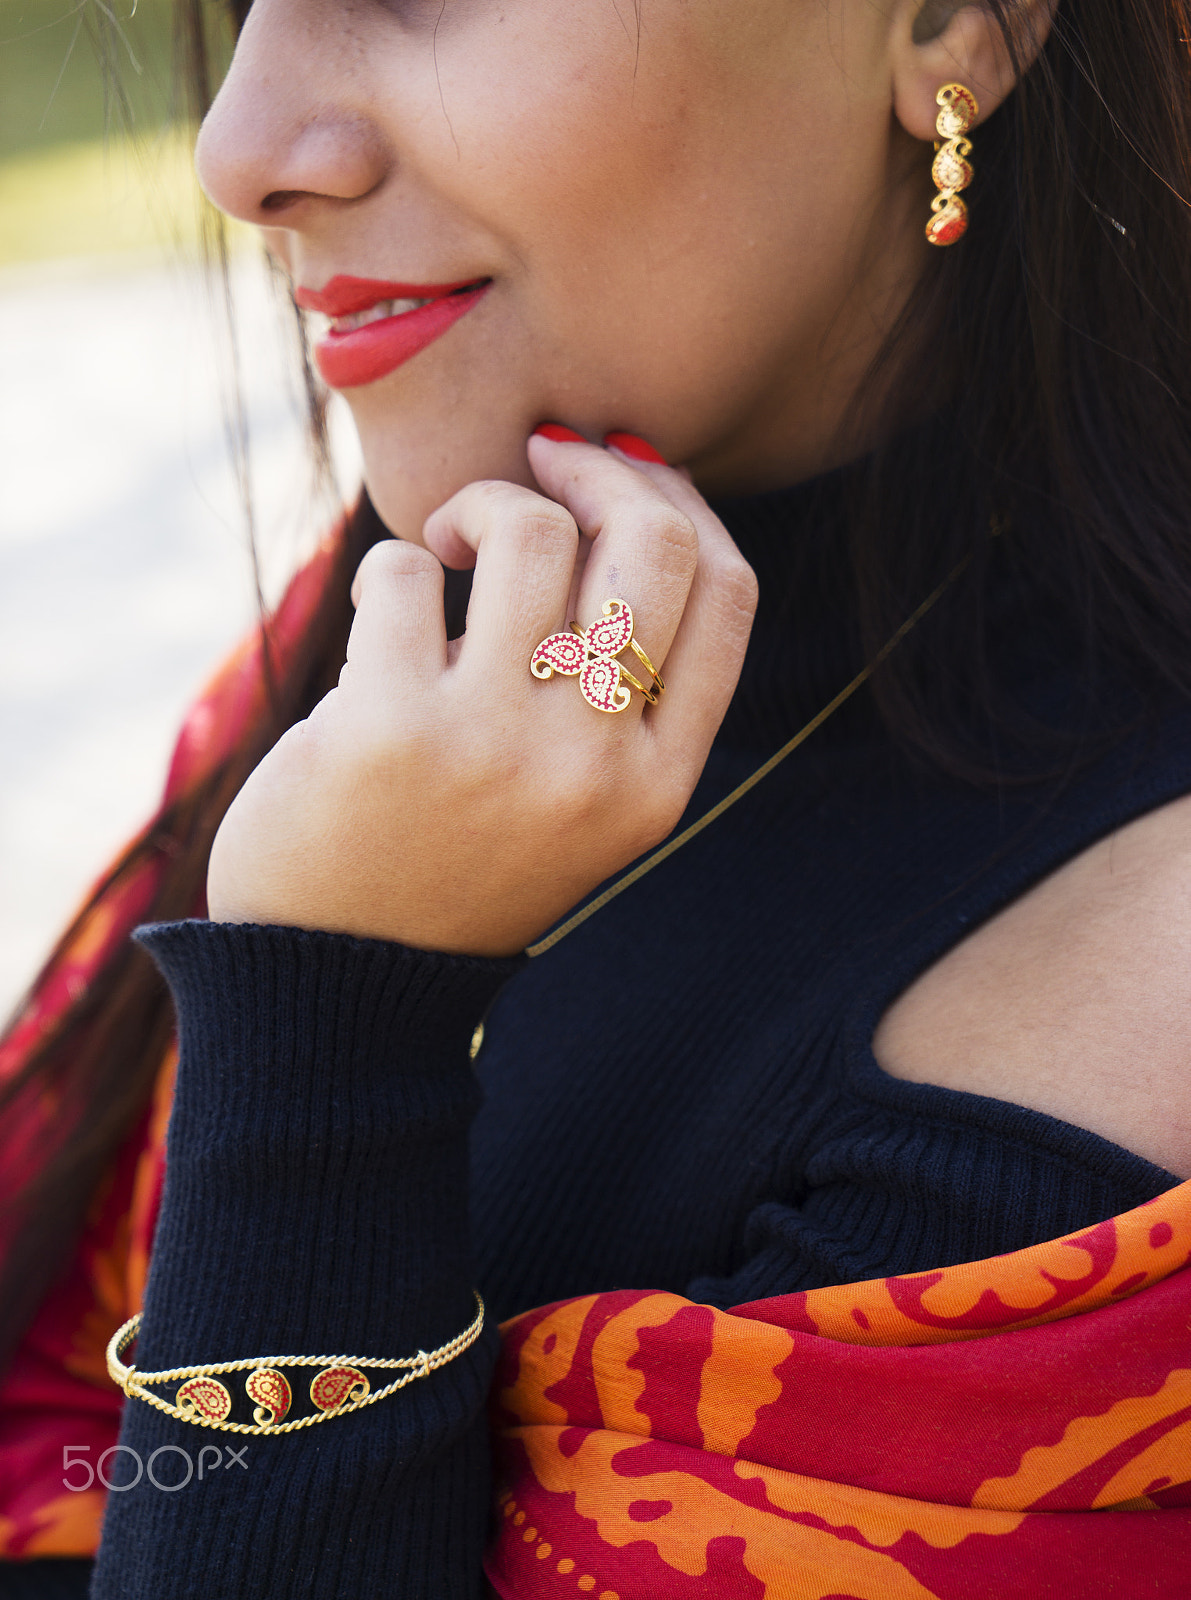 Sony a7 sample photo. Beautiful girl with turkish headscarves and gold antique vintage jewellery photography